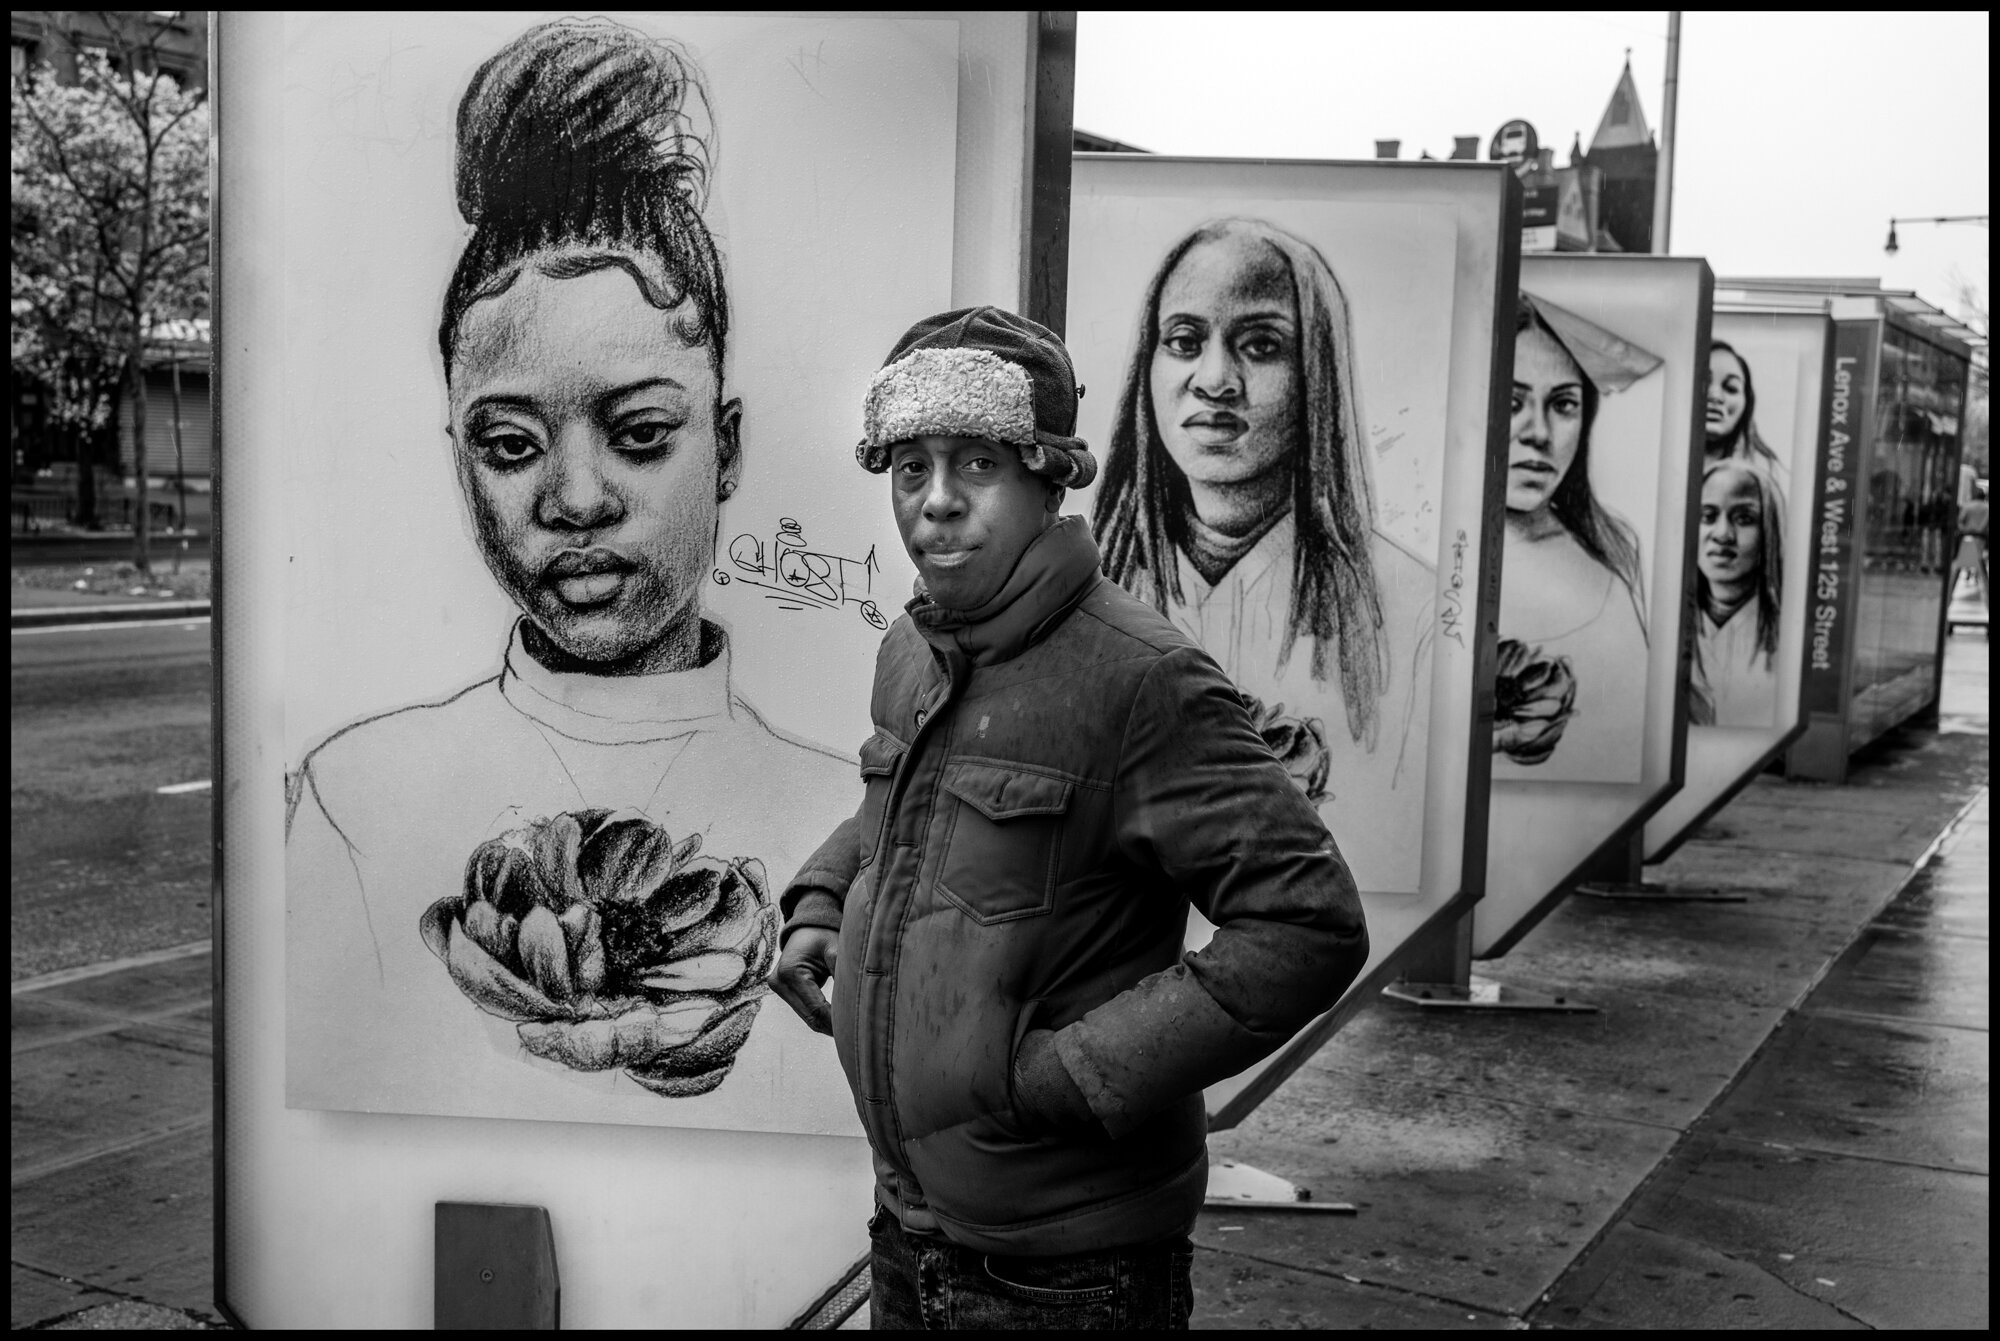  Seimier, 42, told me when I approached to talk, “you are the first person to speak to me all day”. He was standing near some portraits at the corner of Lenox Ave. and 125th Street, but it seemed to me he was just passing by on the sidewalk. After sp